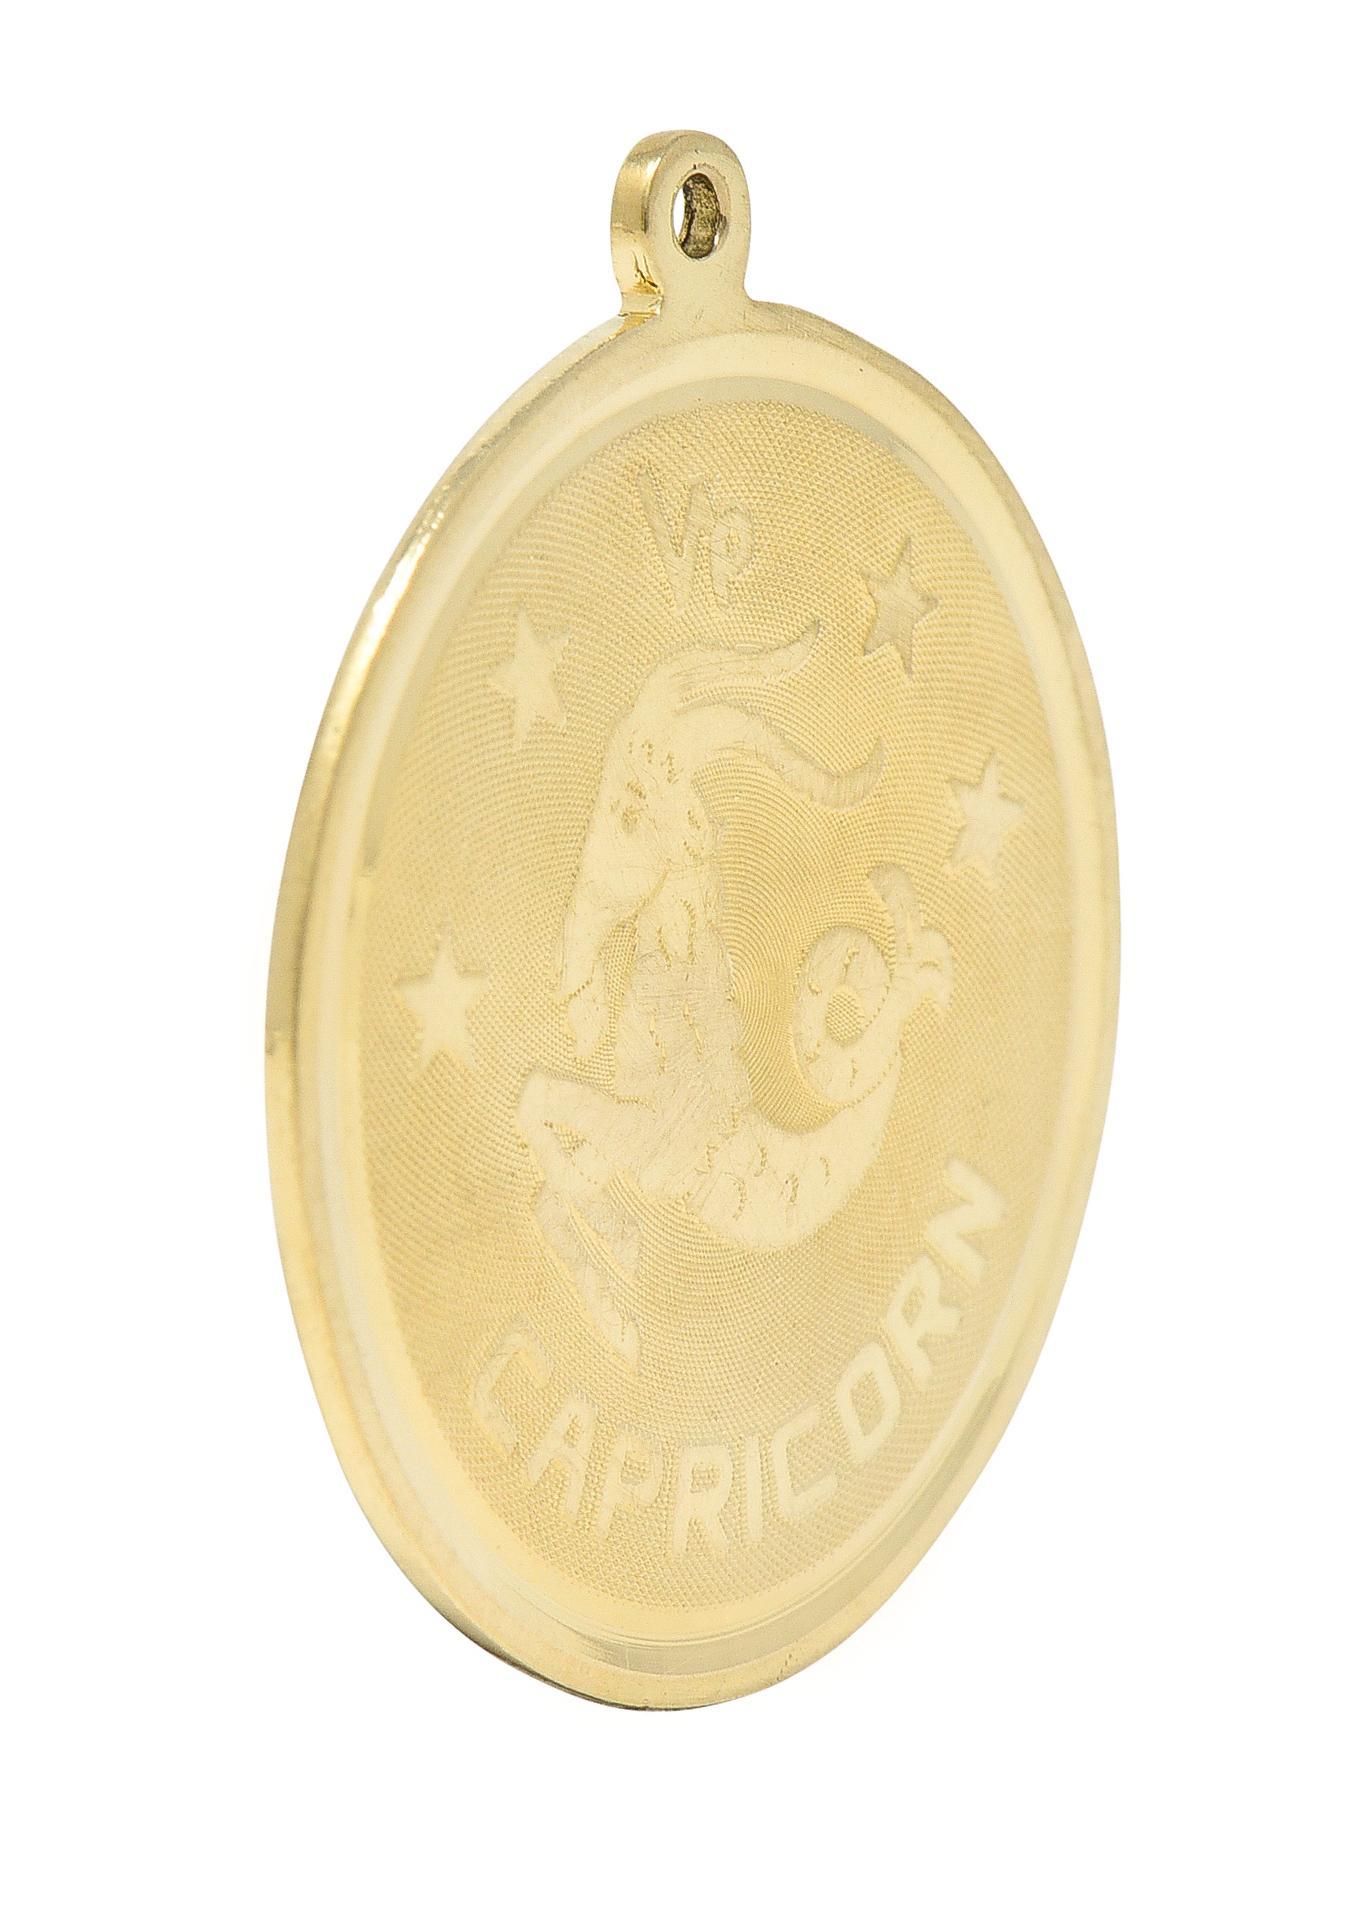 Designed as a round disk with high polished edges and a raised Capricorn zodiac motif
With the astrological Capricorn symbol, the Capricorn figure, stars, and inscribed 'CAPRICORN'
With a finely cross-hatch textured recess
Completed by pierced